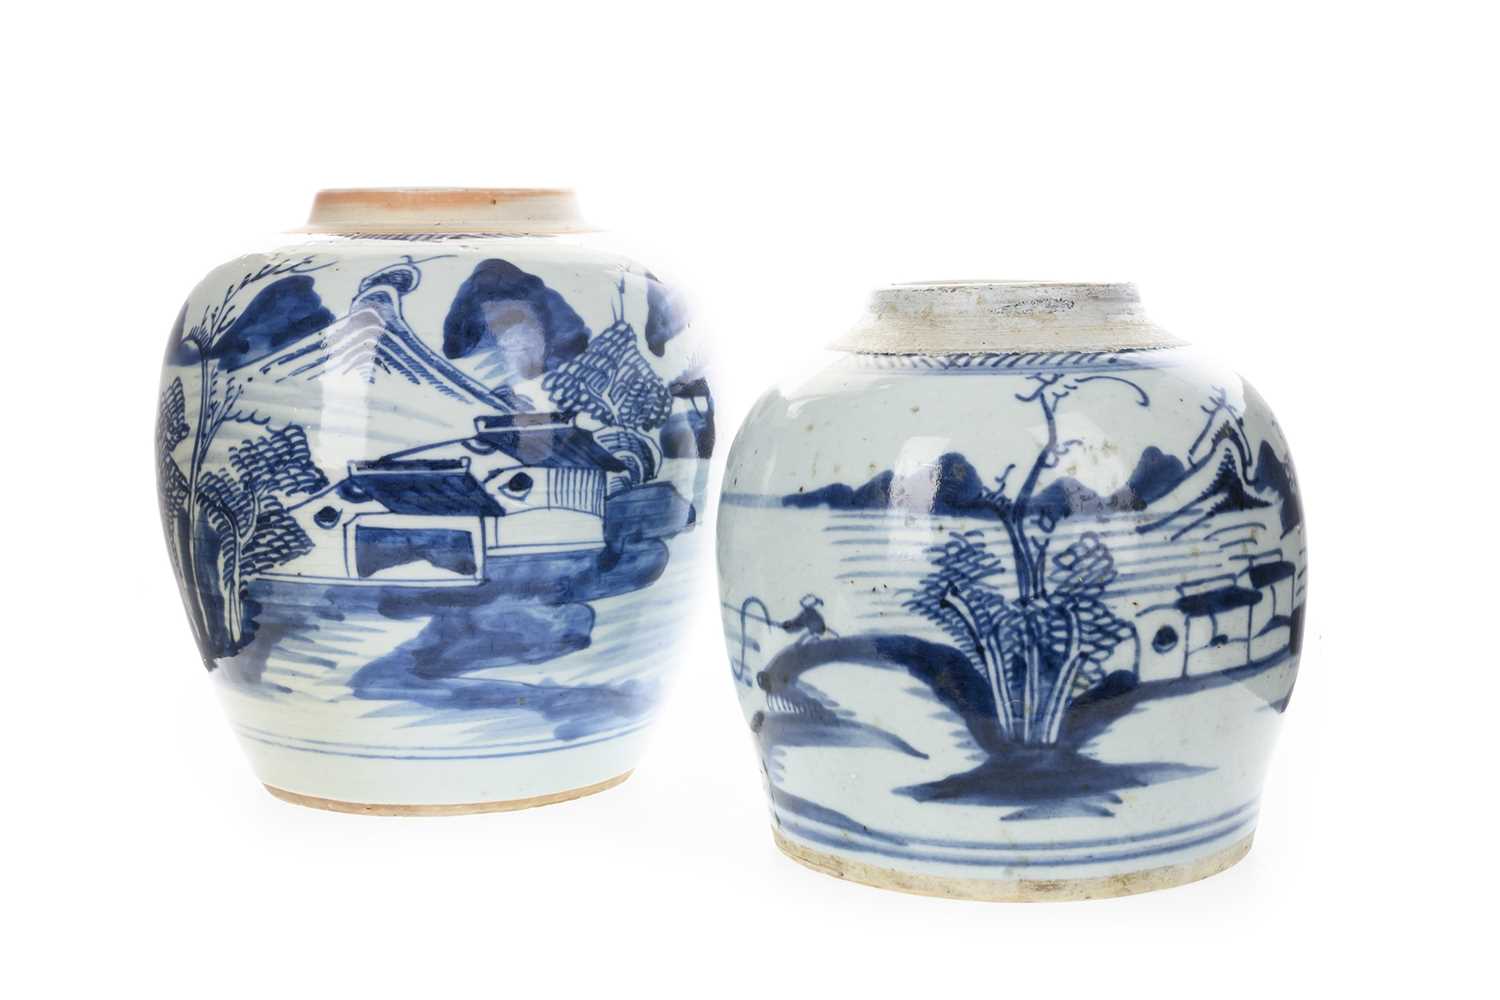 GROUP OF FIVE CHINESE BLUE AND WHITE GINGER JARS, 18TH/19TH CENTURY - Image 3 of 3